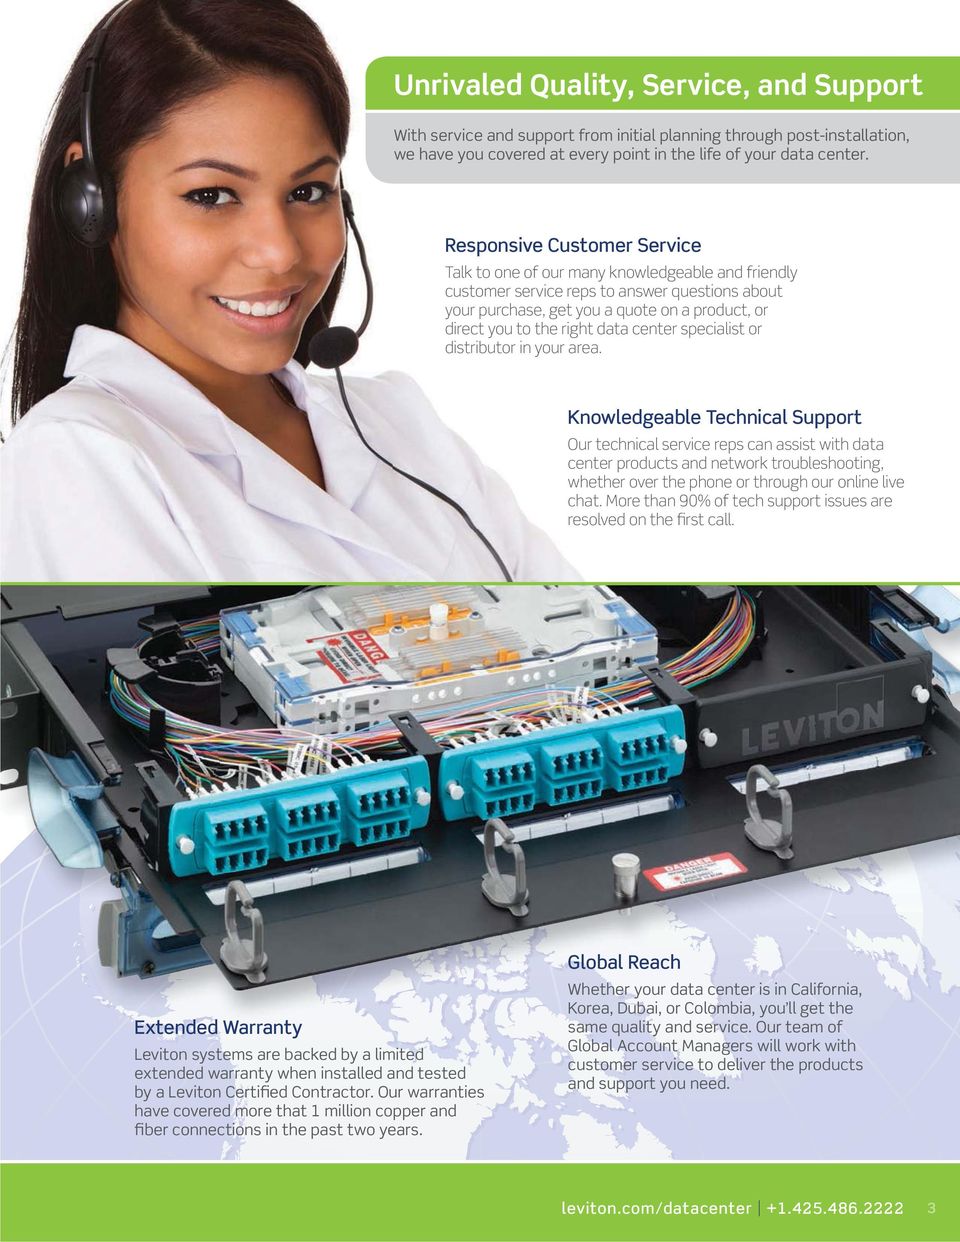 data center specialist or distributor in your area.